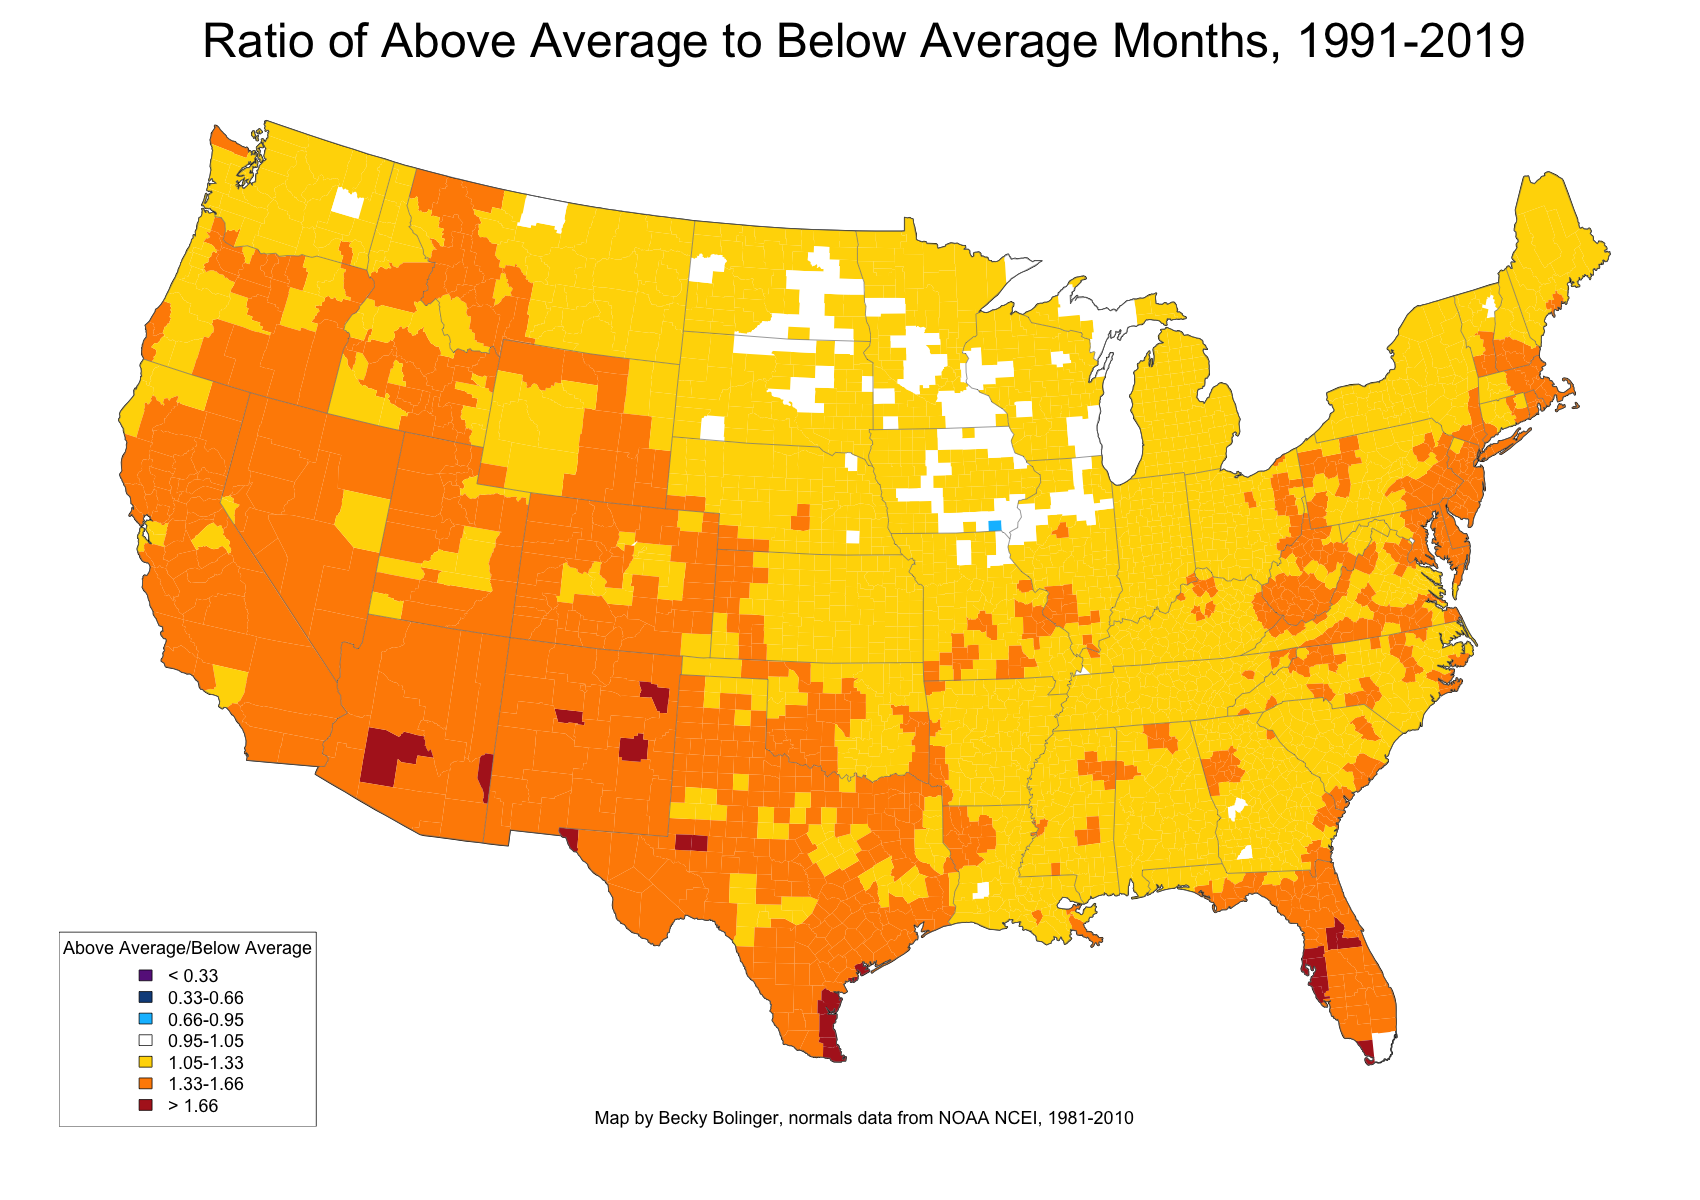 Using 1981-2010 as average, number of above average months divided by number of below average months from 1991-2019.